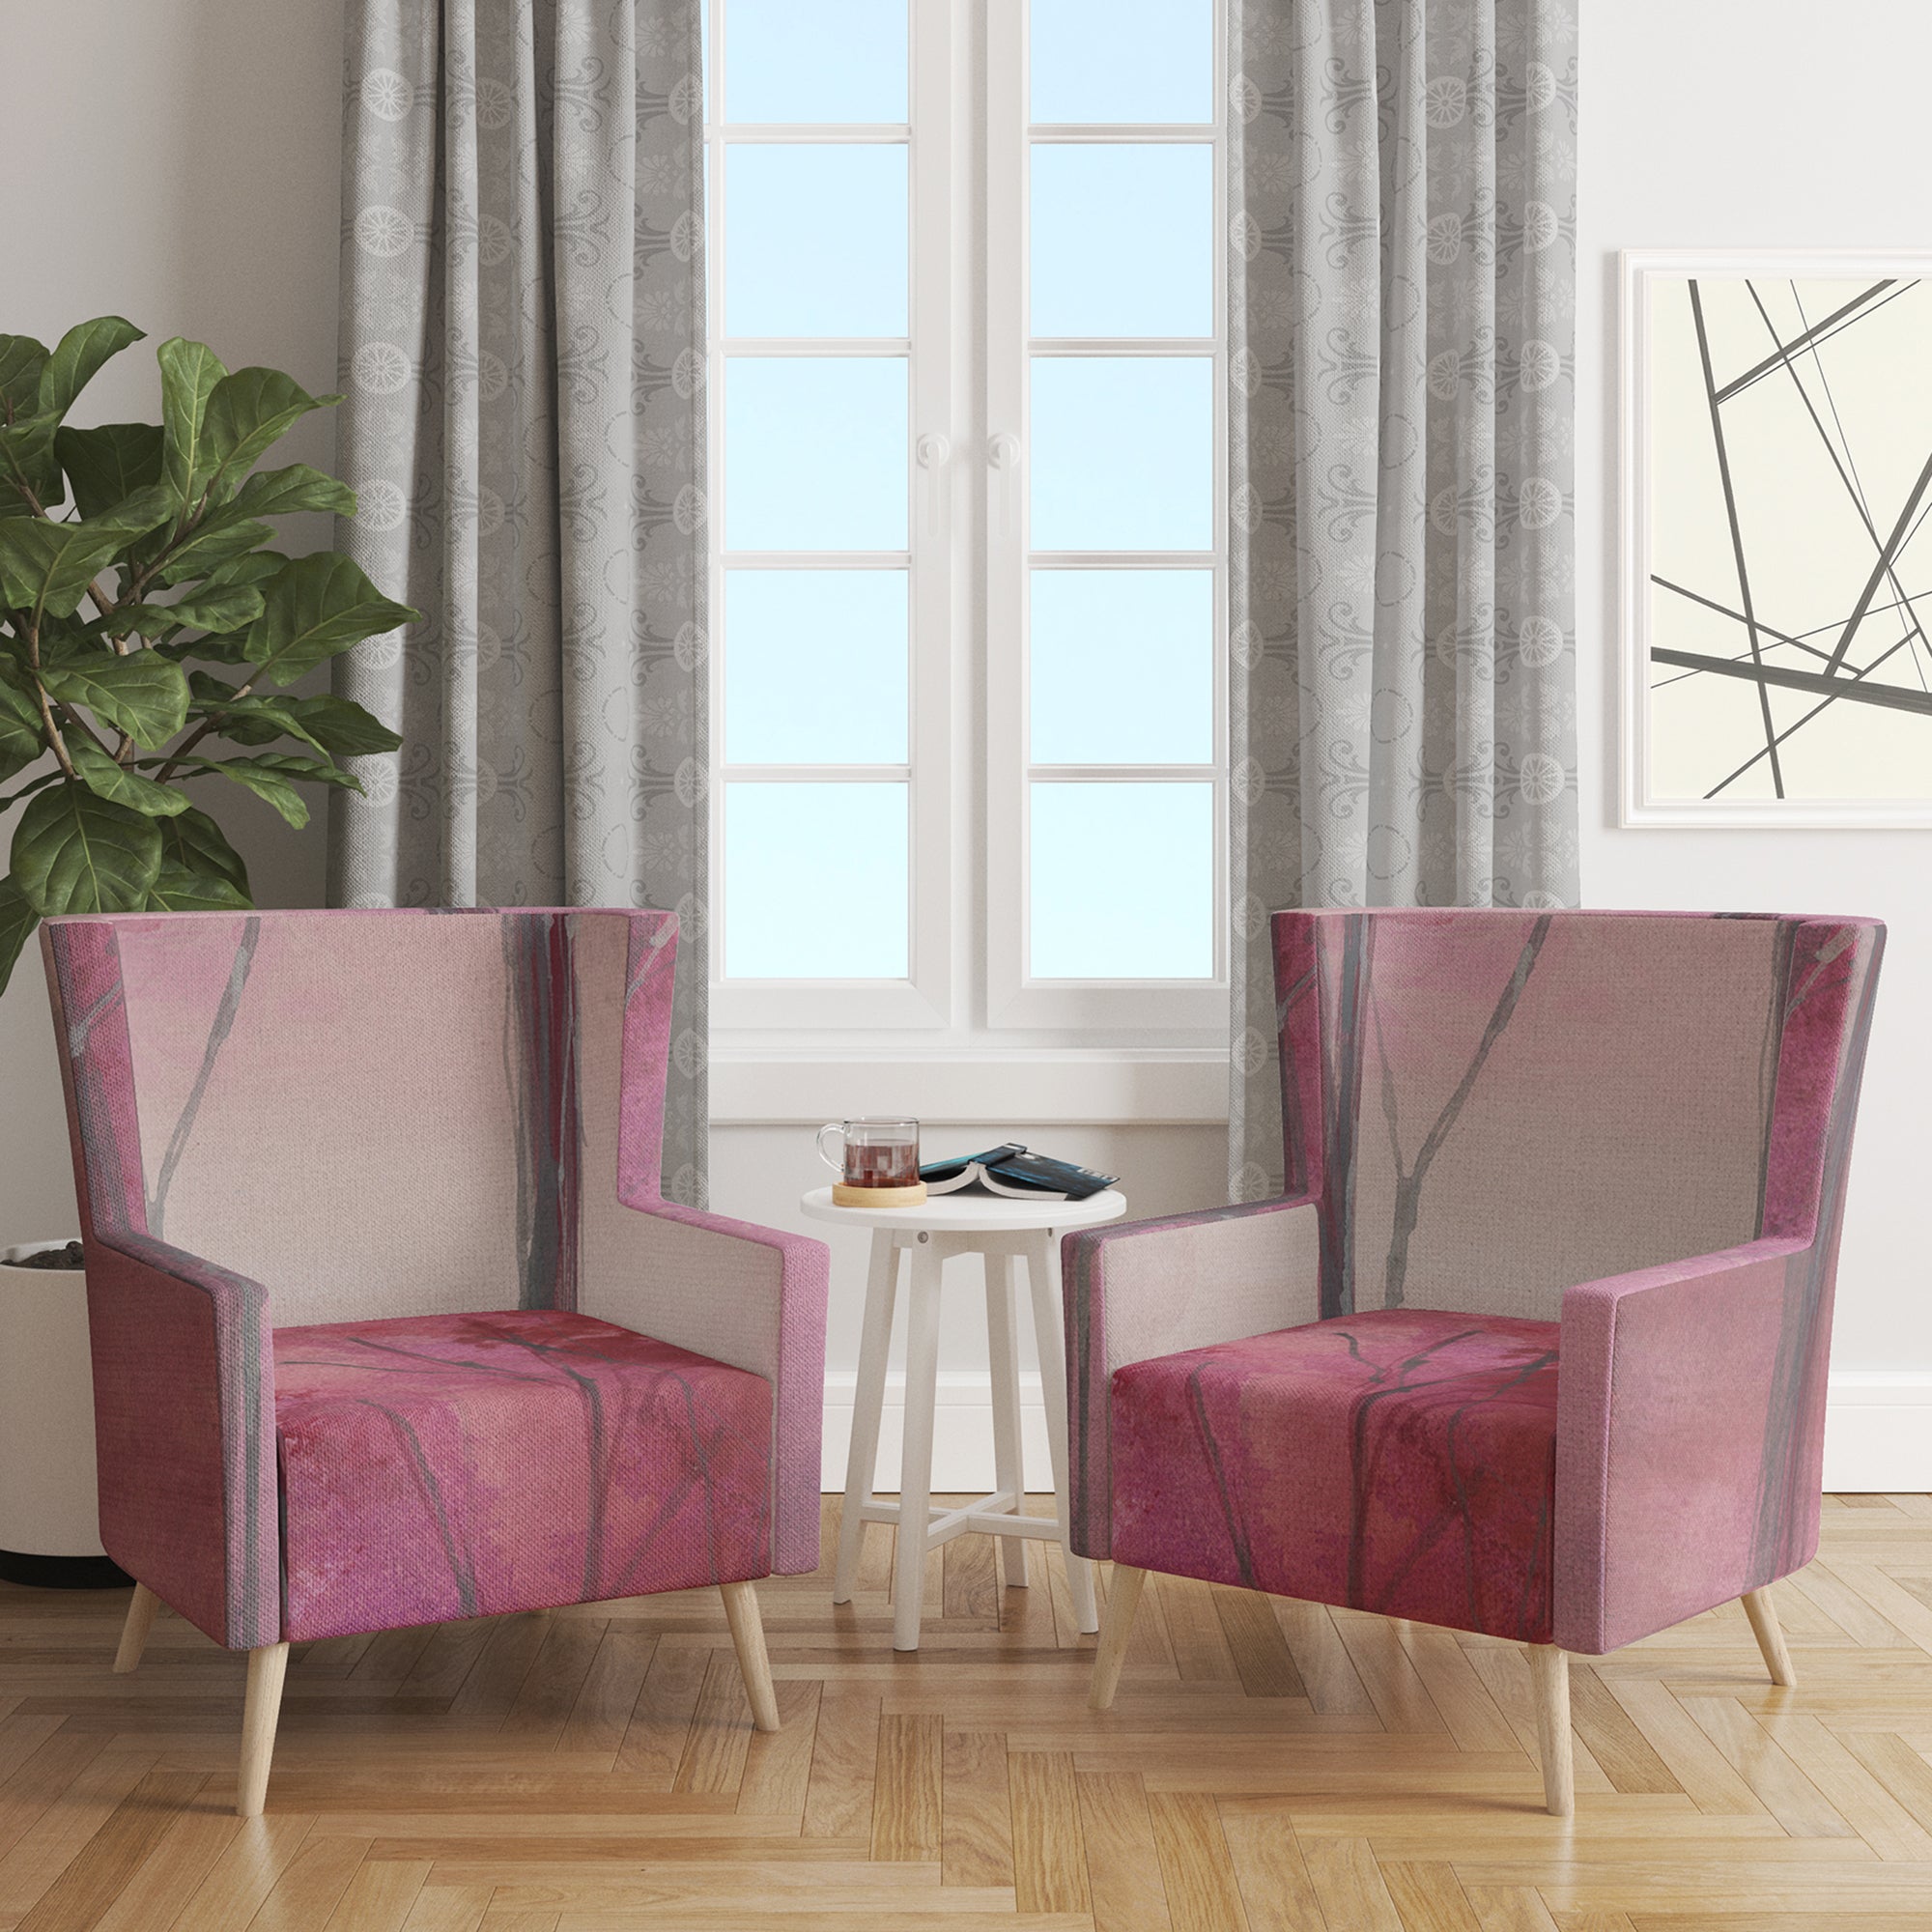 Designart 'Shabby Pink Under the Trees' Shabby Chic Accent Chair